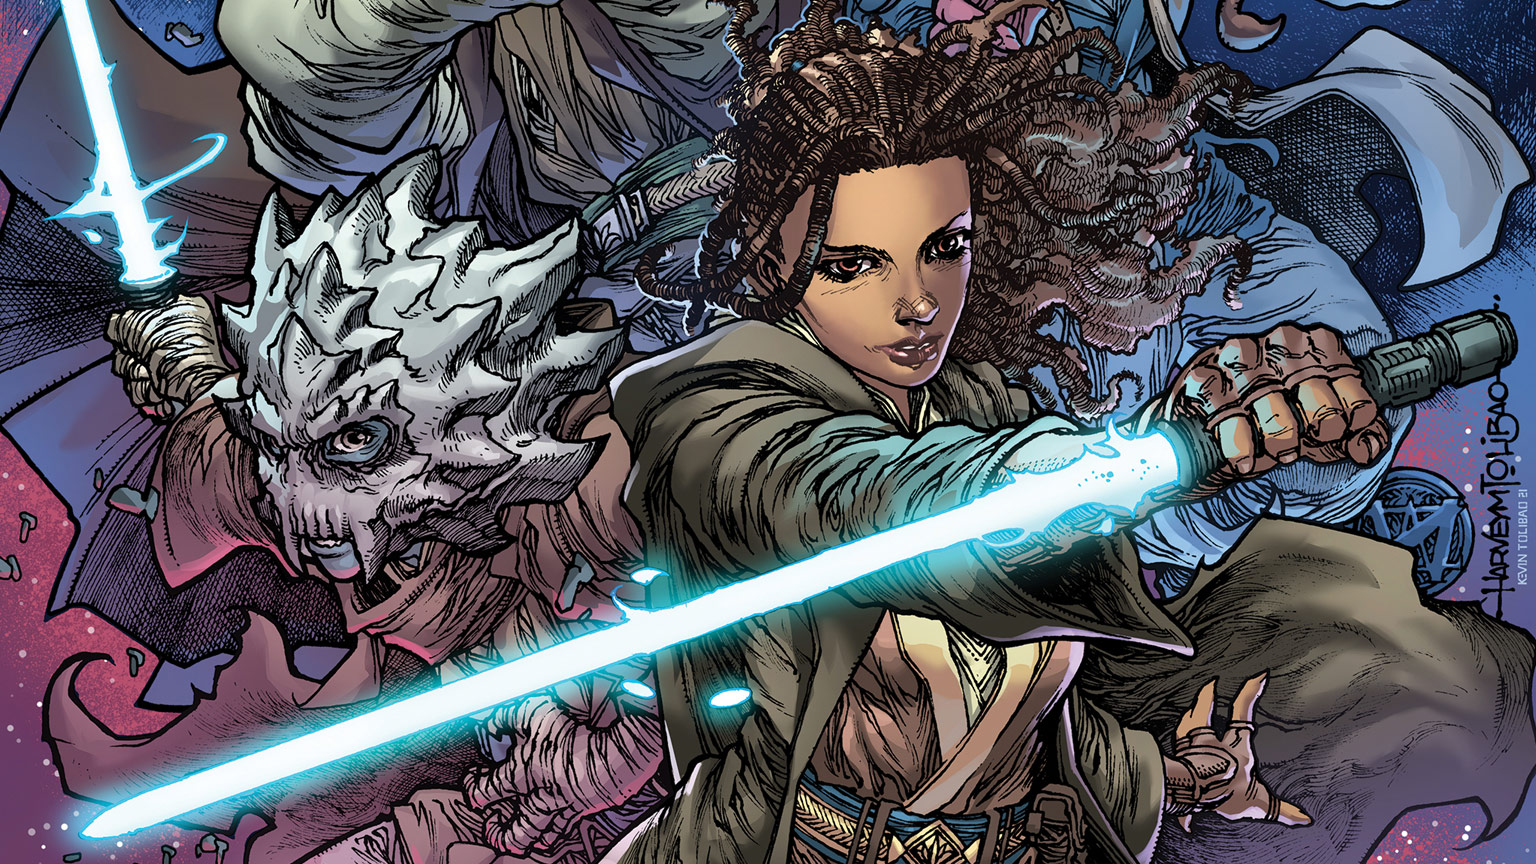 The Jedi Spring into Action in IDW’s Star Wars: The High Republic Adventures #4 – Exclusive Preview